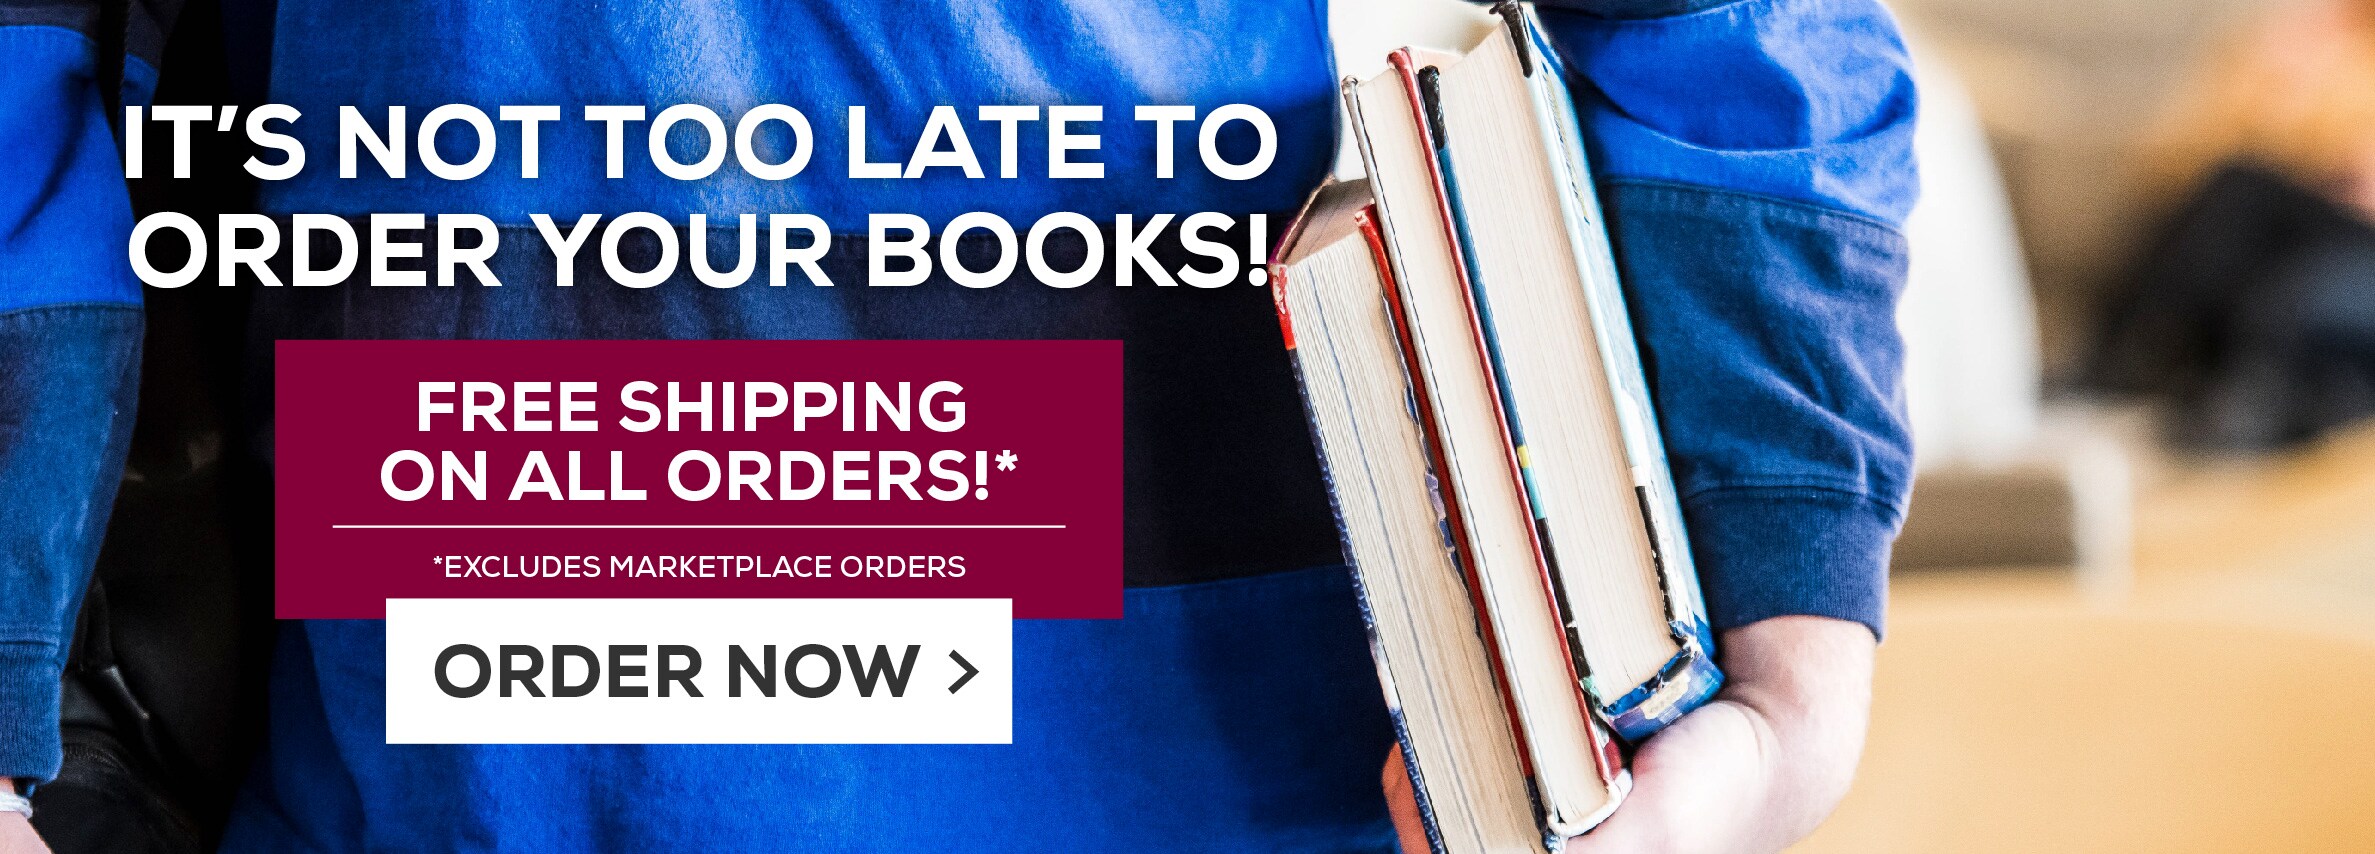 Itâ€™s not too late to order your books! Free shipping on all orders!* Excludes marketplace purchases. Order Now.